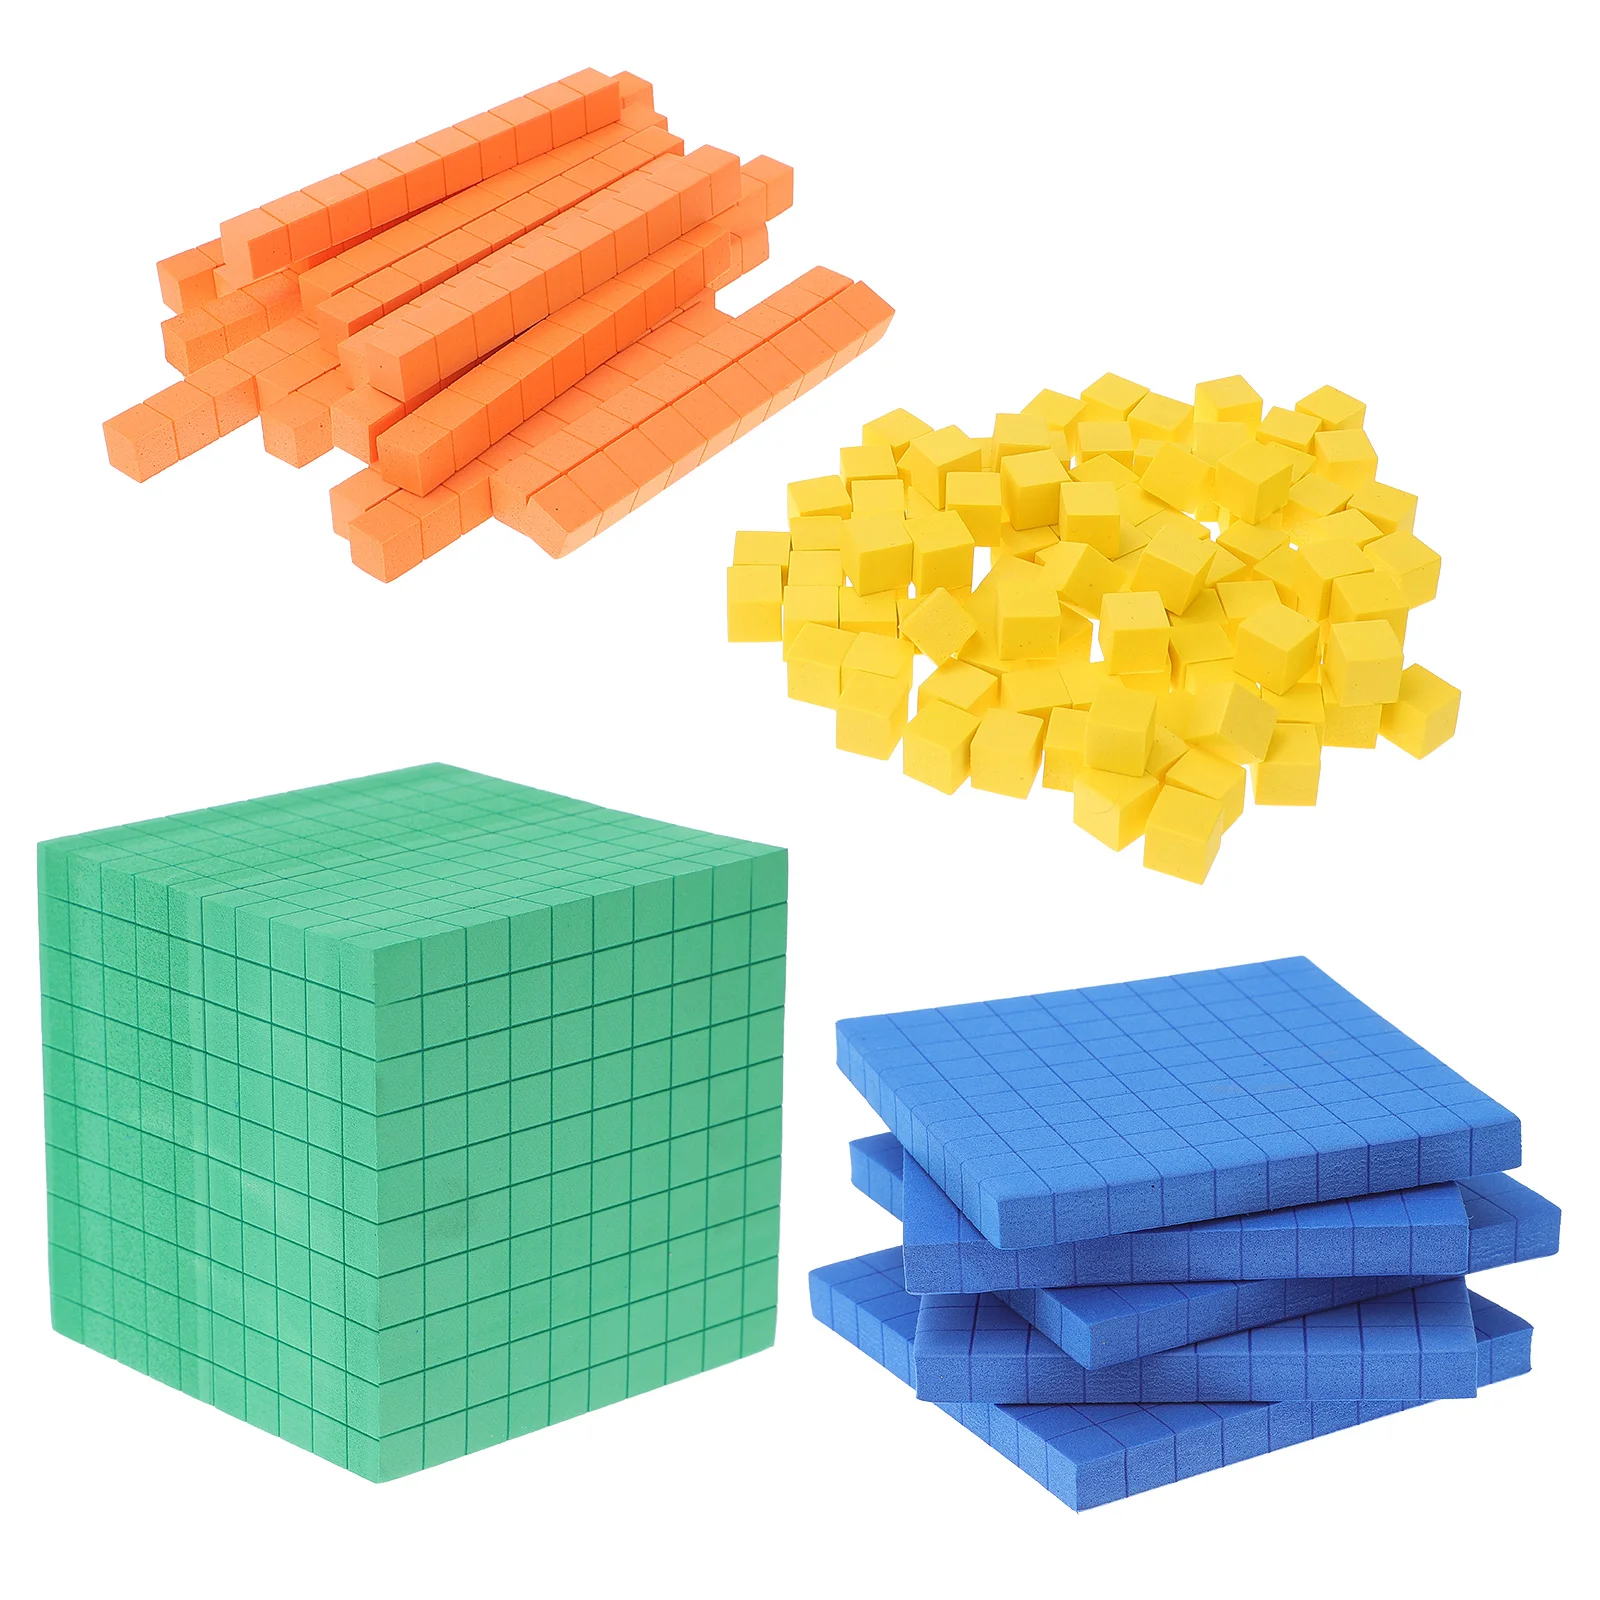 

Math Blocks Counting Cubes Toy Kids Educational Base Manipulatives Ten Toys Plaything Counters Value Place Cube Linking Set